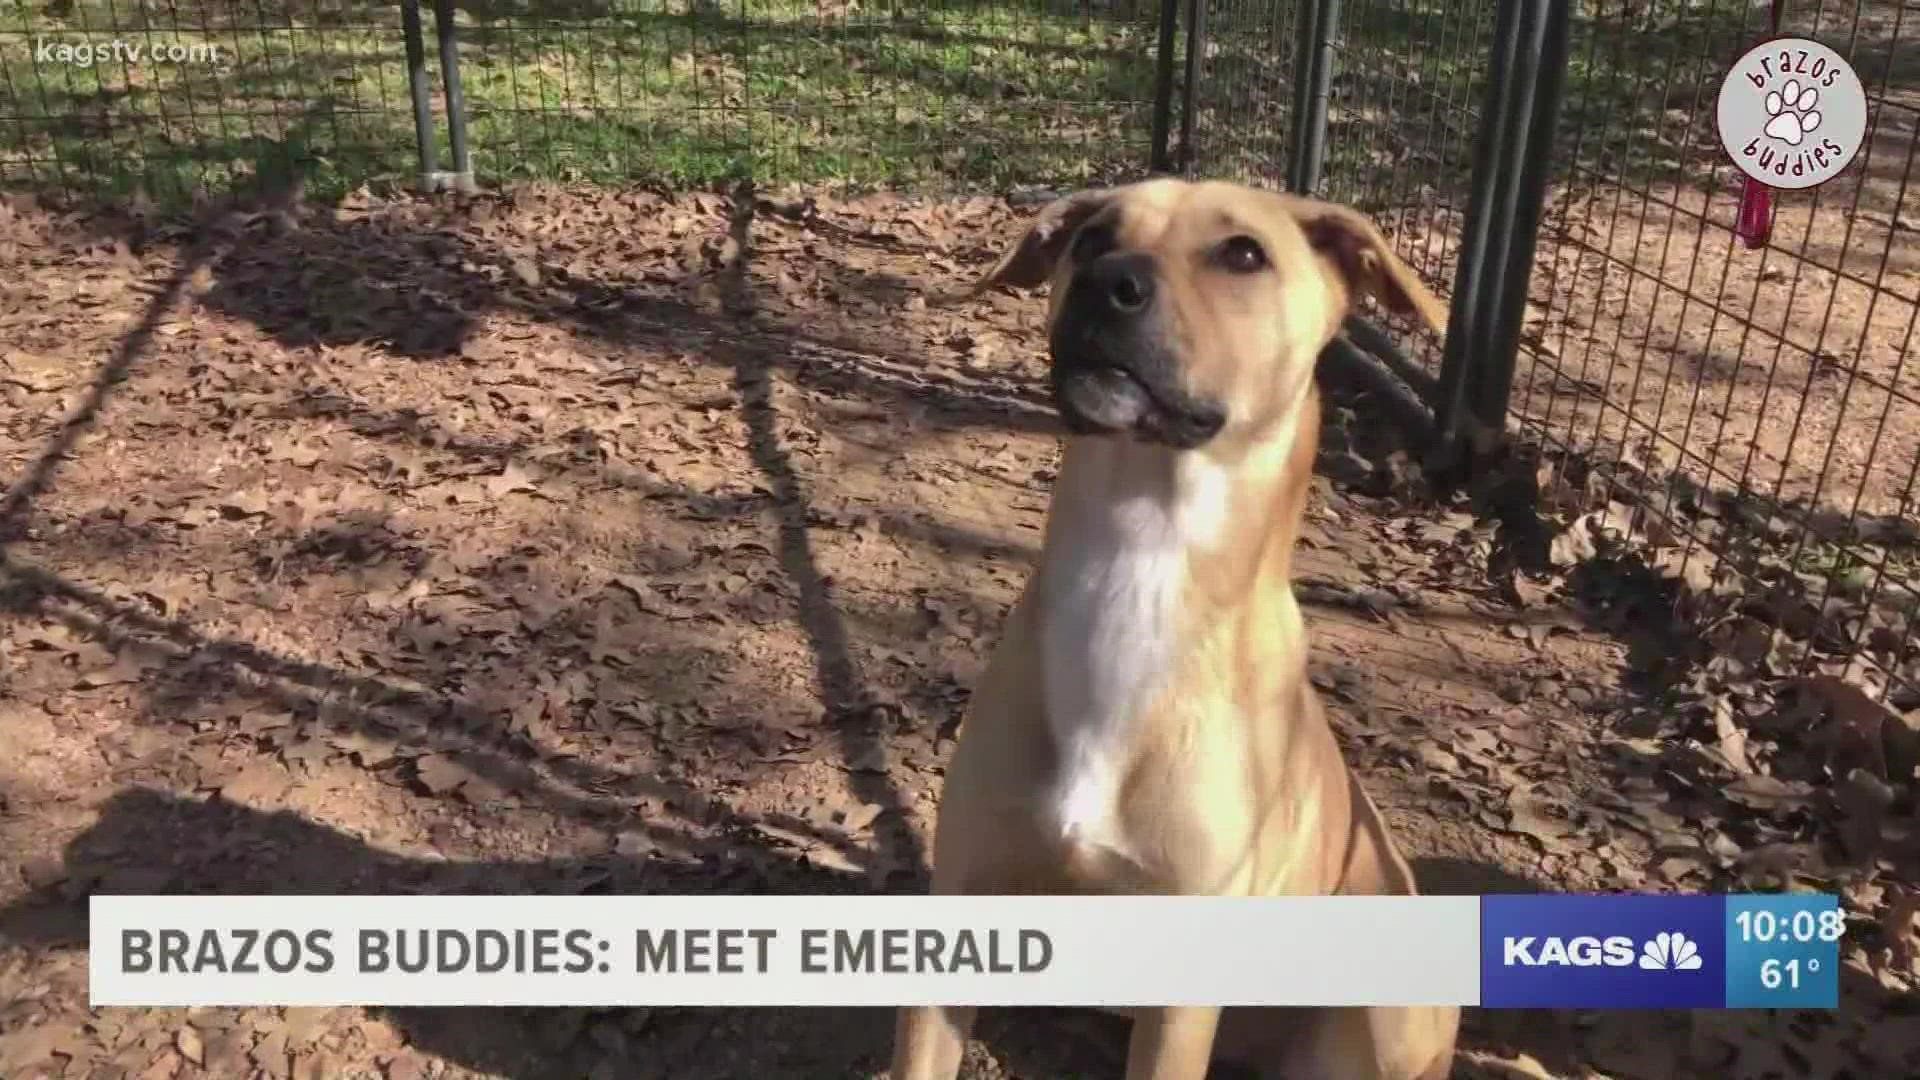 Emerald is looking for a home, just in time for Christmas